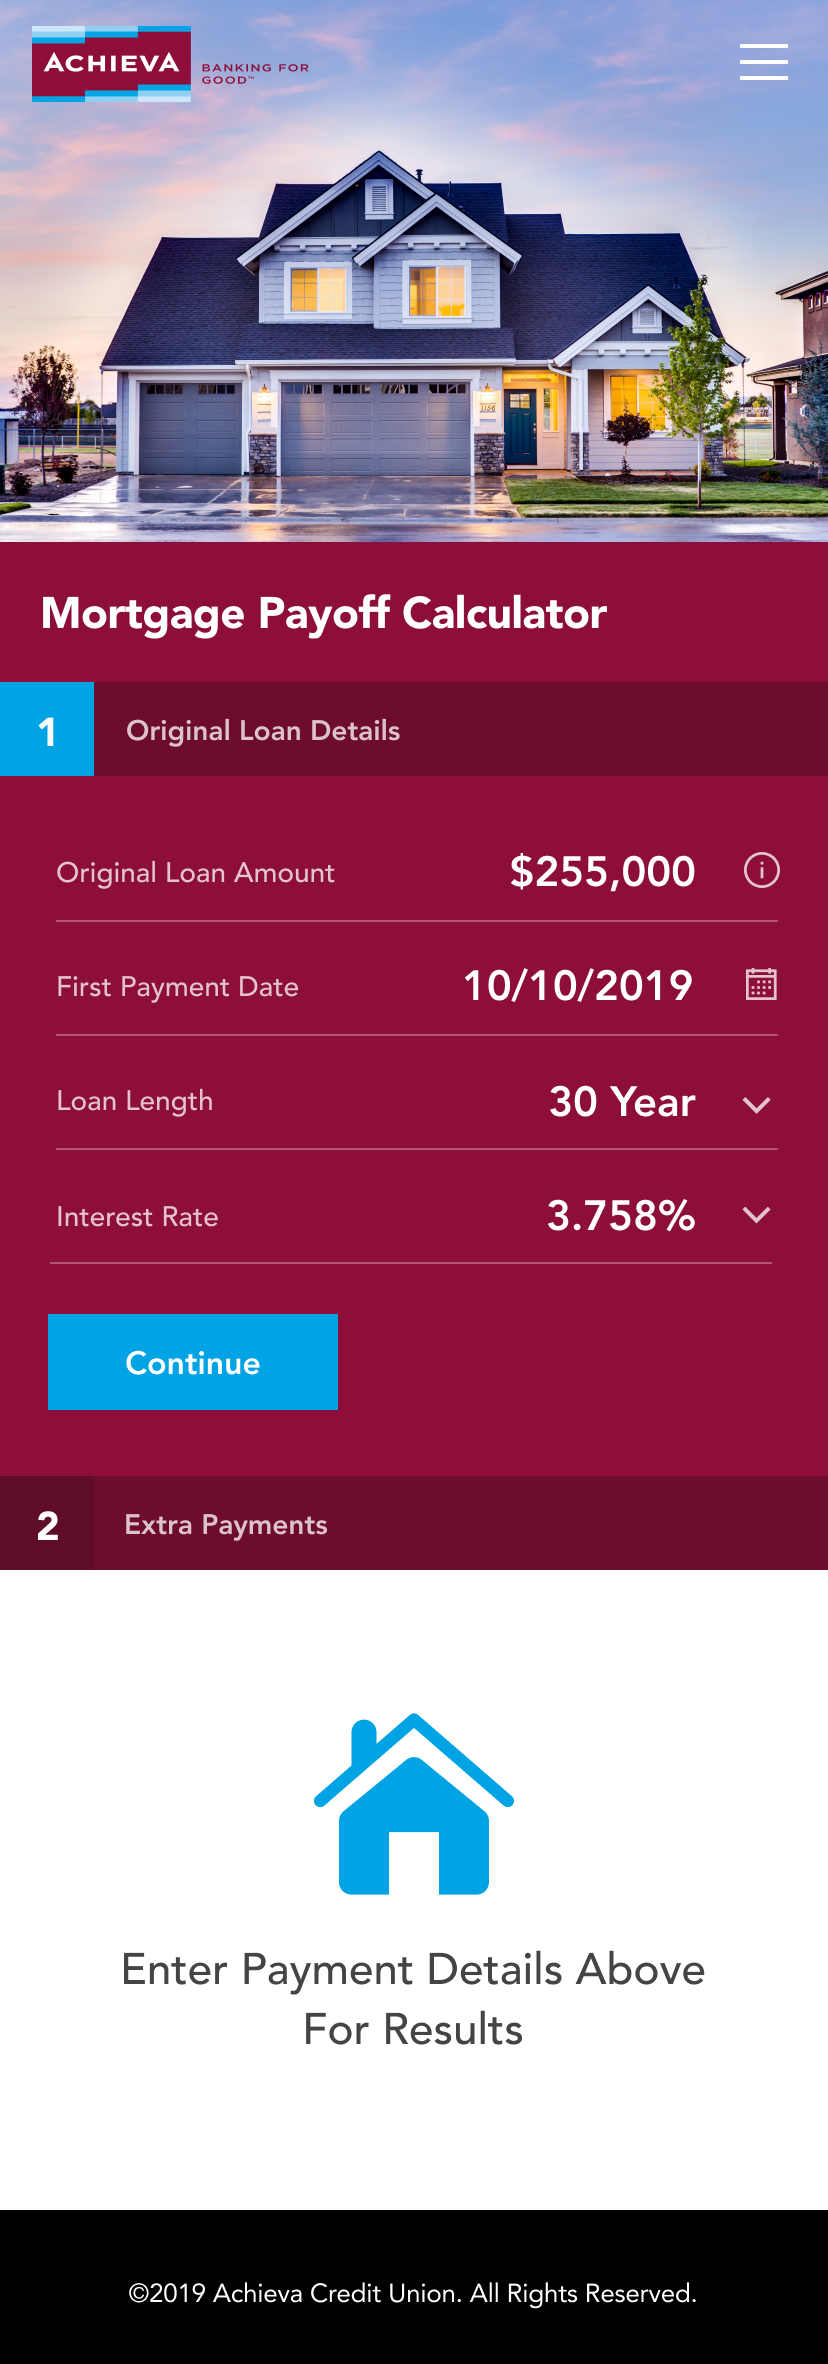 mortgage payoff calculator with extra principal payment